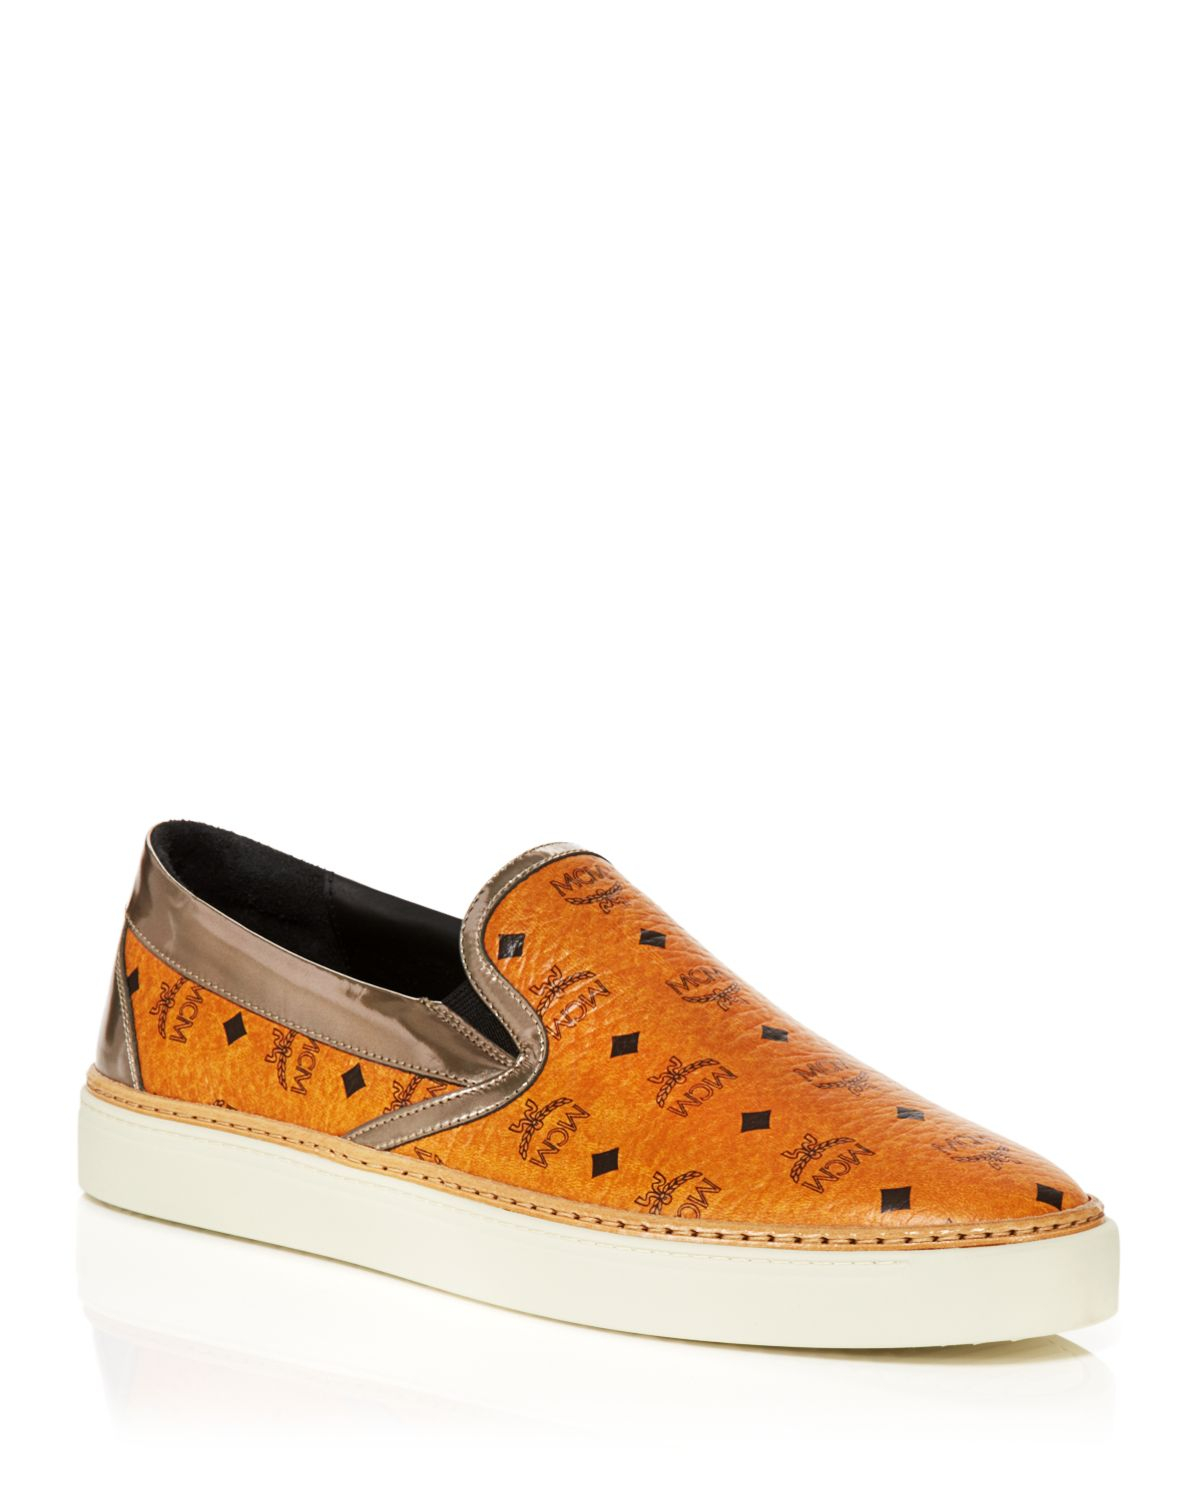 MCM Slip On Sneaker With Gold Tone Trim in Brown for Men - Lyst